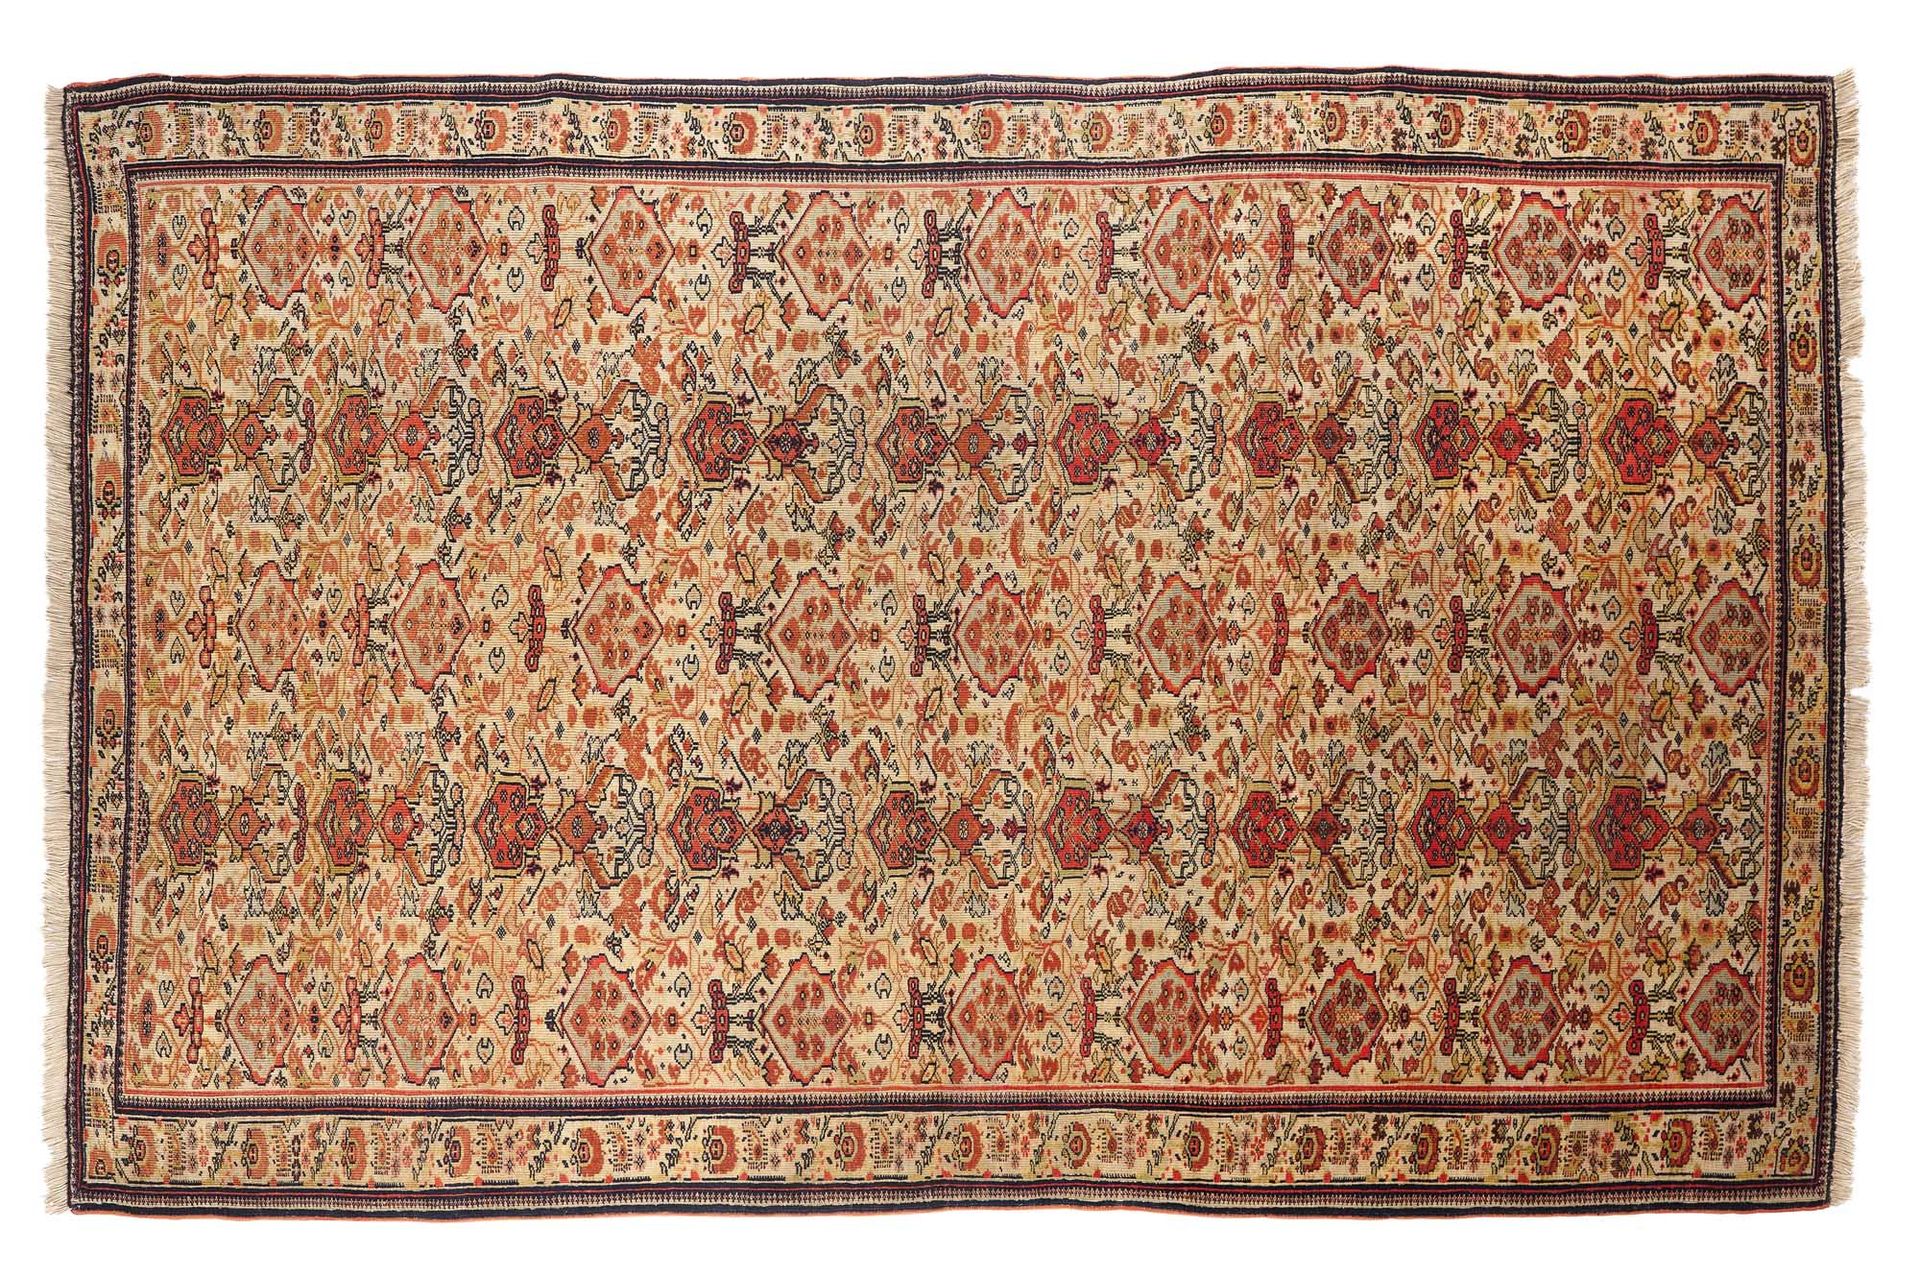 Null Carpet MELAYER Zili-Sultan (Persia) end of 19th century

Dimensions : 188 x&hellip;